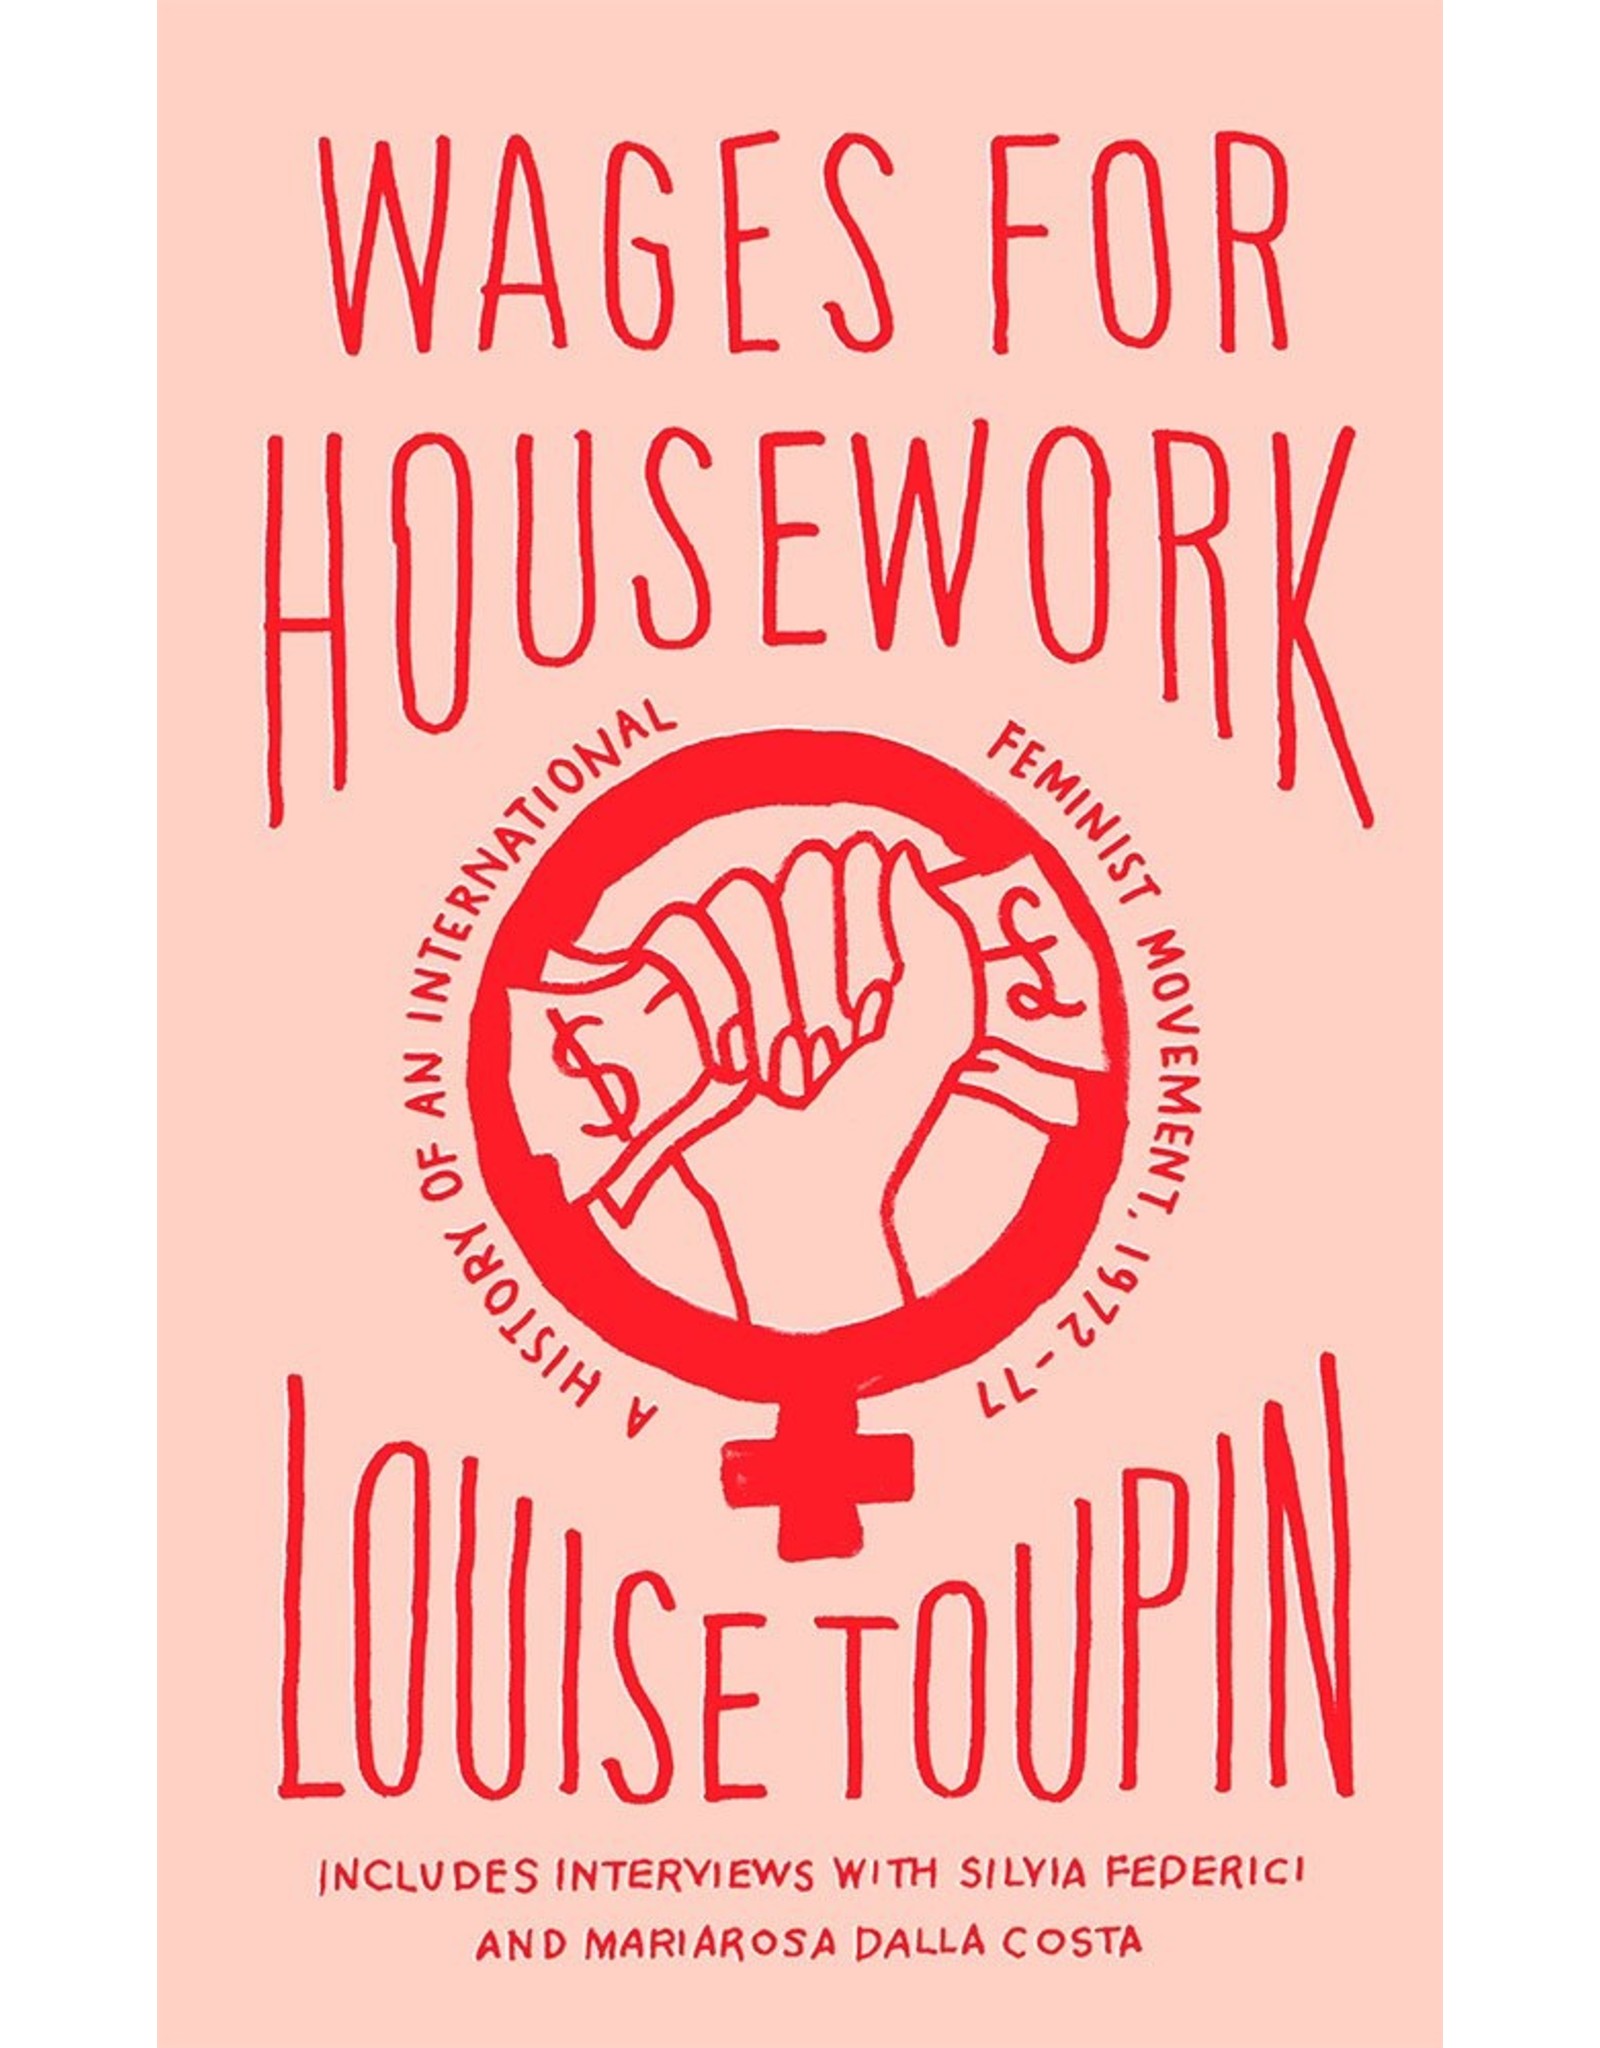 Literature Wages for Housework: A History of an International Feminist Movement, 1972–77